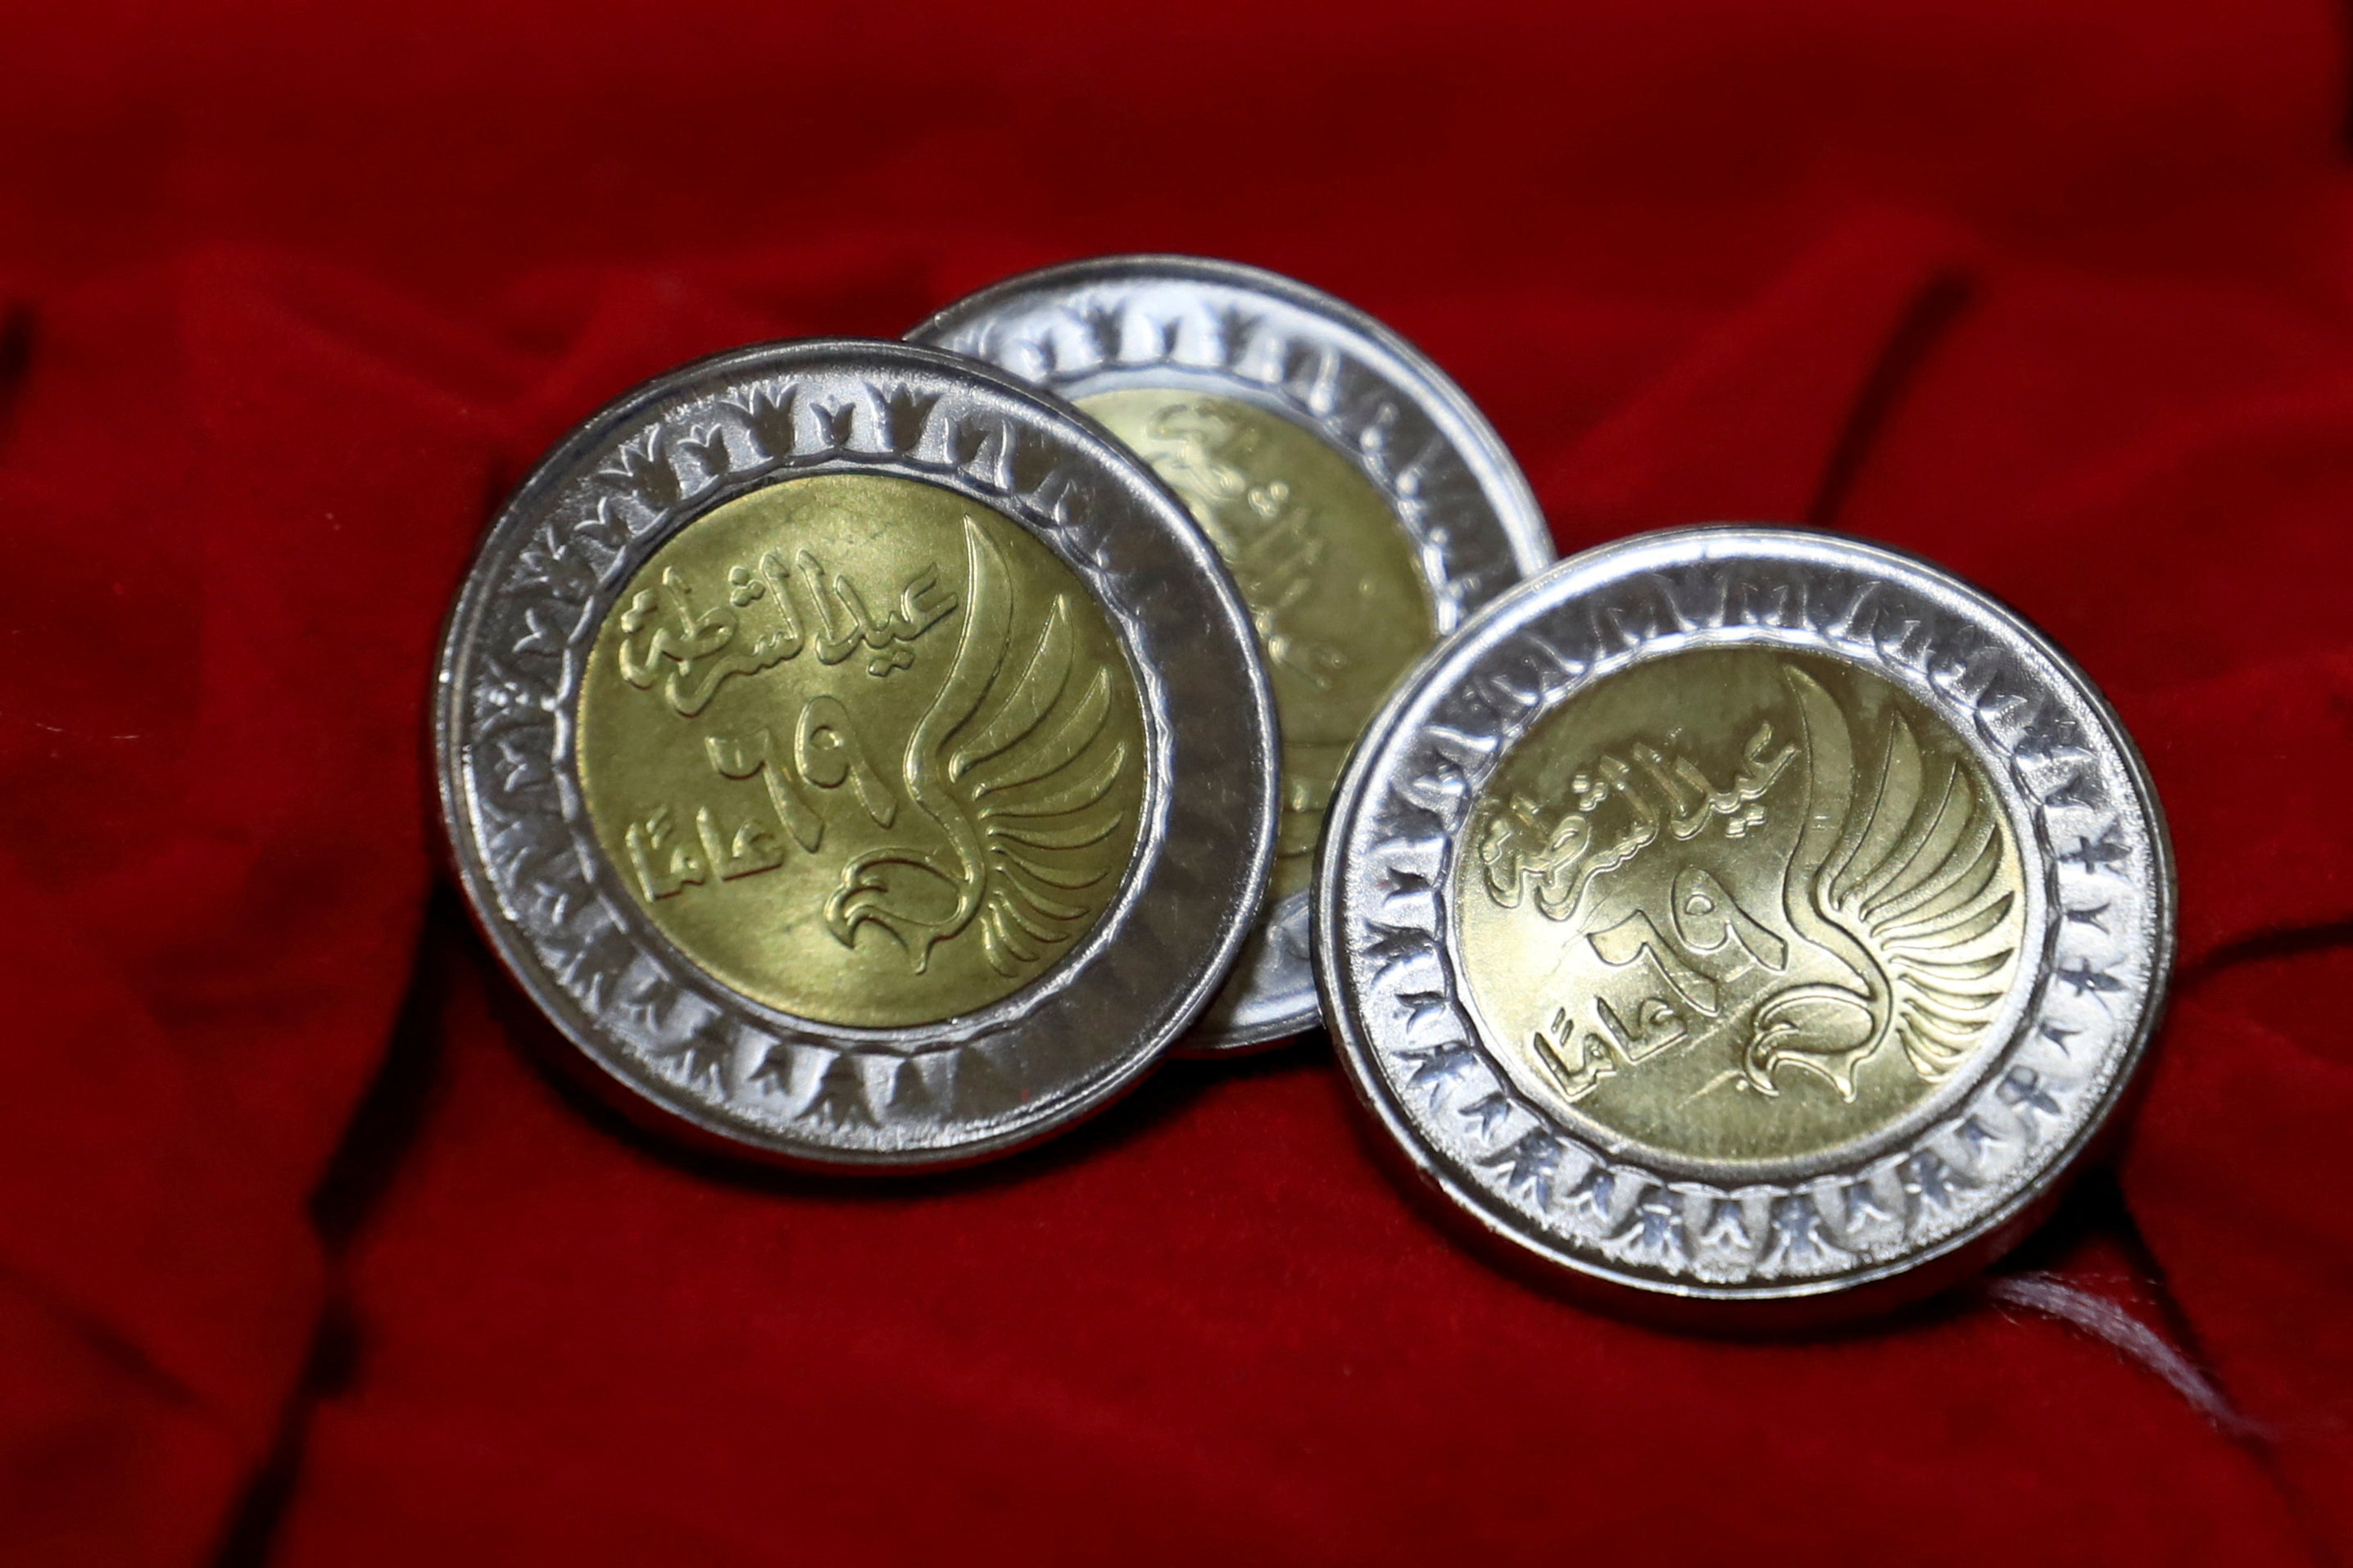 Coins of a one Egyptian pound are seen at the Mint Museum to mark police day which falls on January 25, the anniversary of the country's 2011 uprising, in Cairo